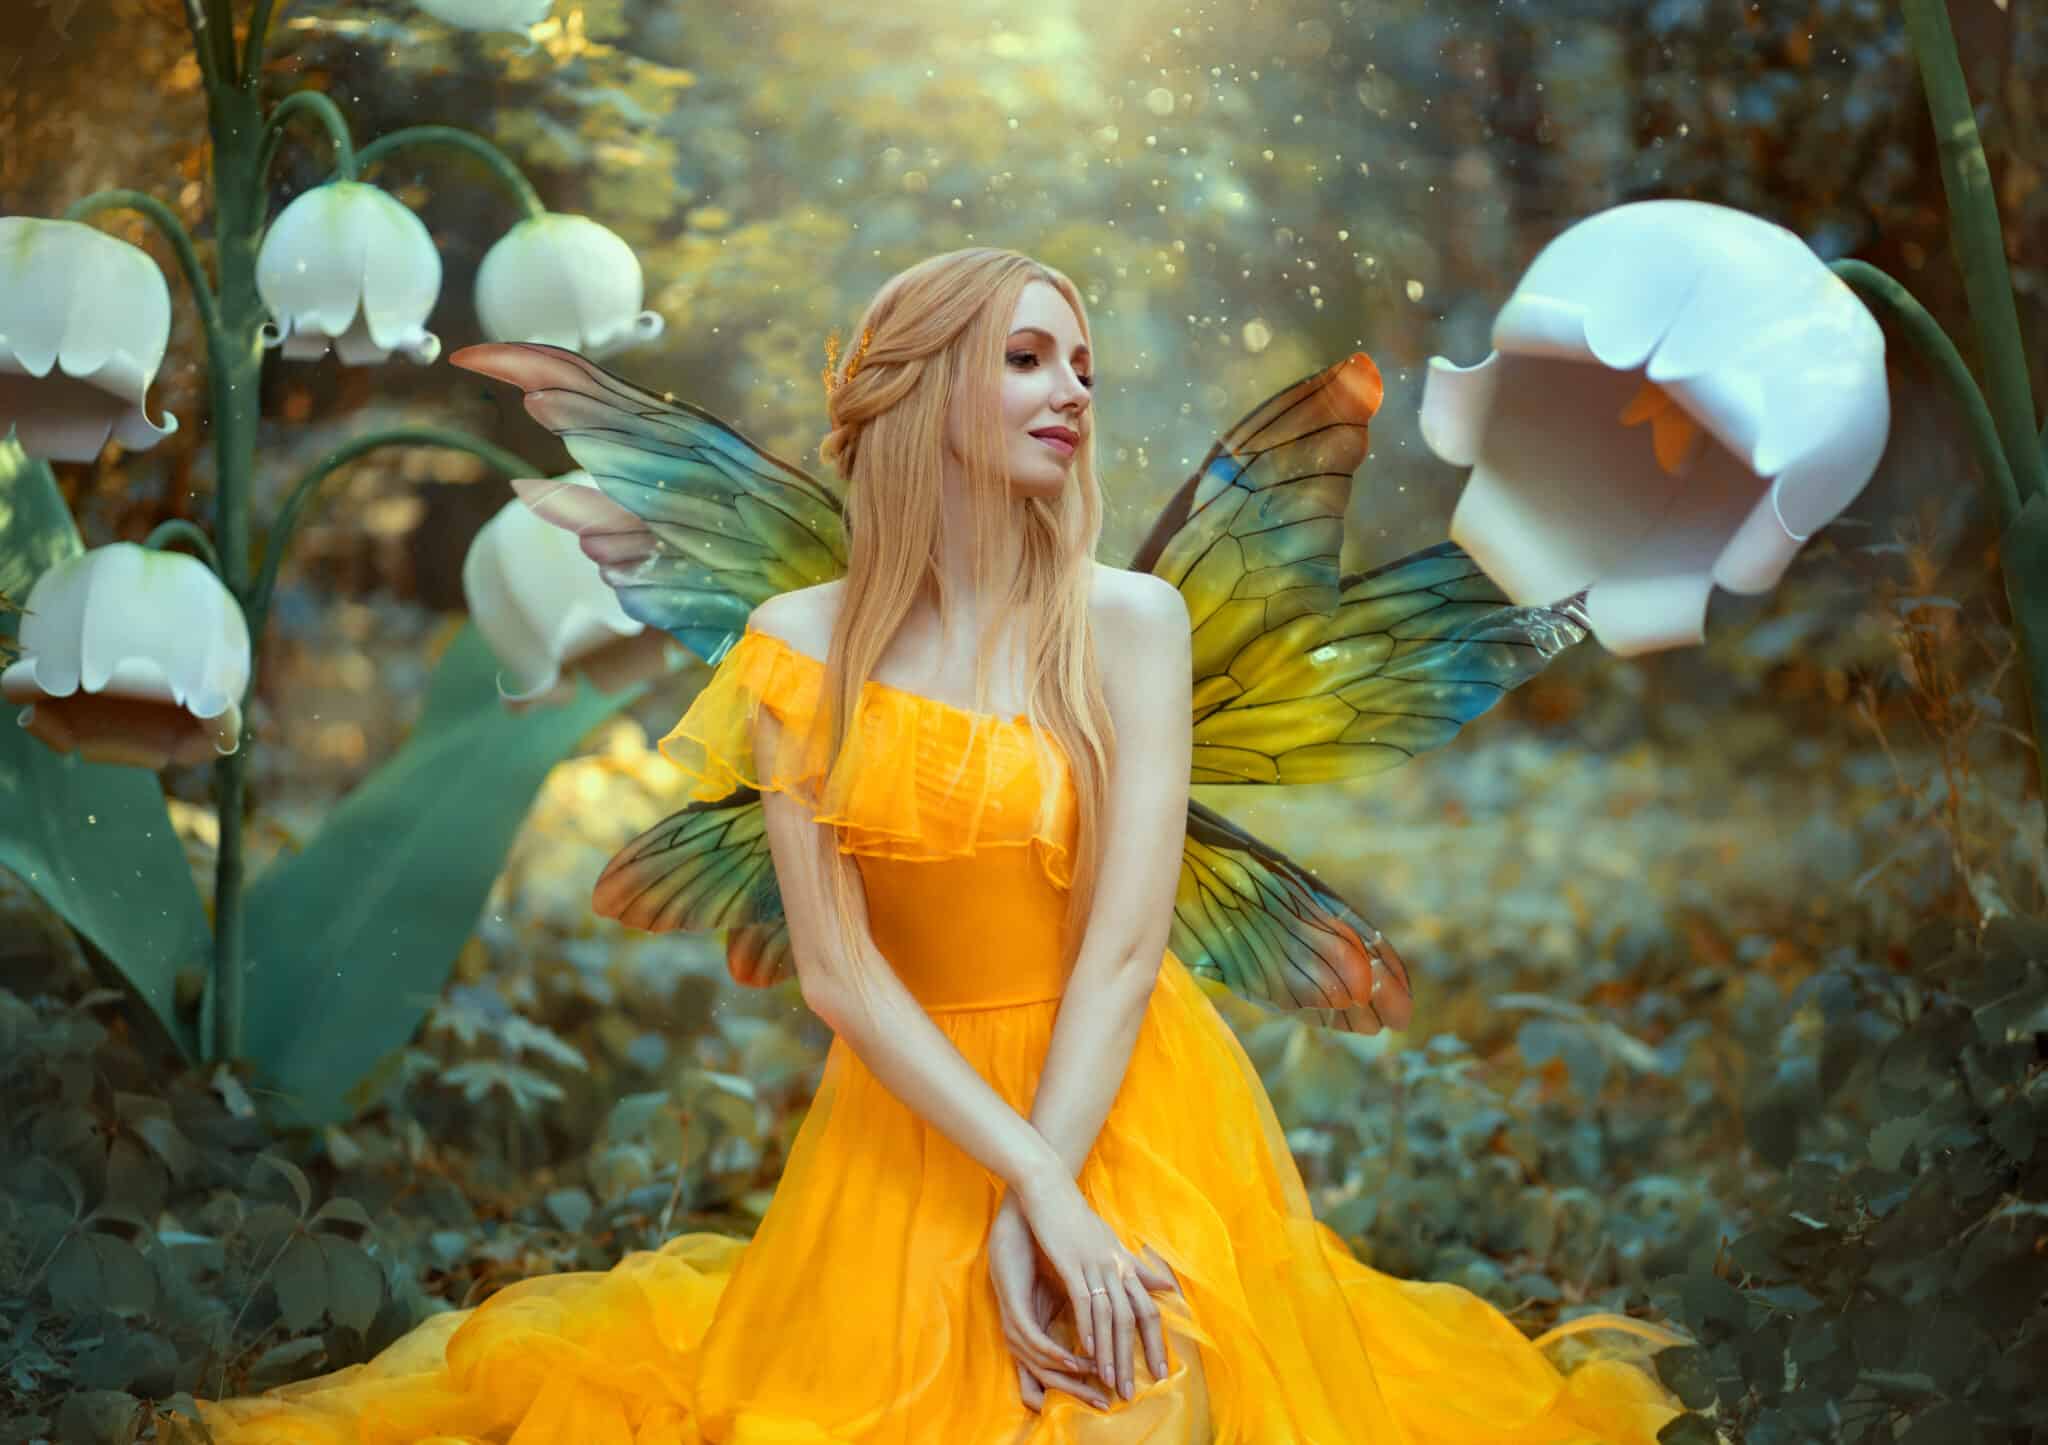 Portrait of happy fantasy woman blonde forest fairy. Fashion model in a bright yellow dress with butterfly wings sits posing in nature. Large flowers scenery decor white lilies. Light magic radiance.